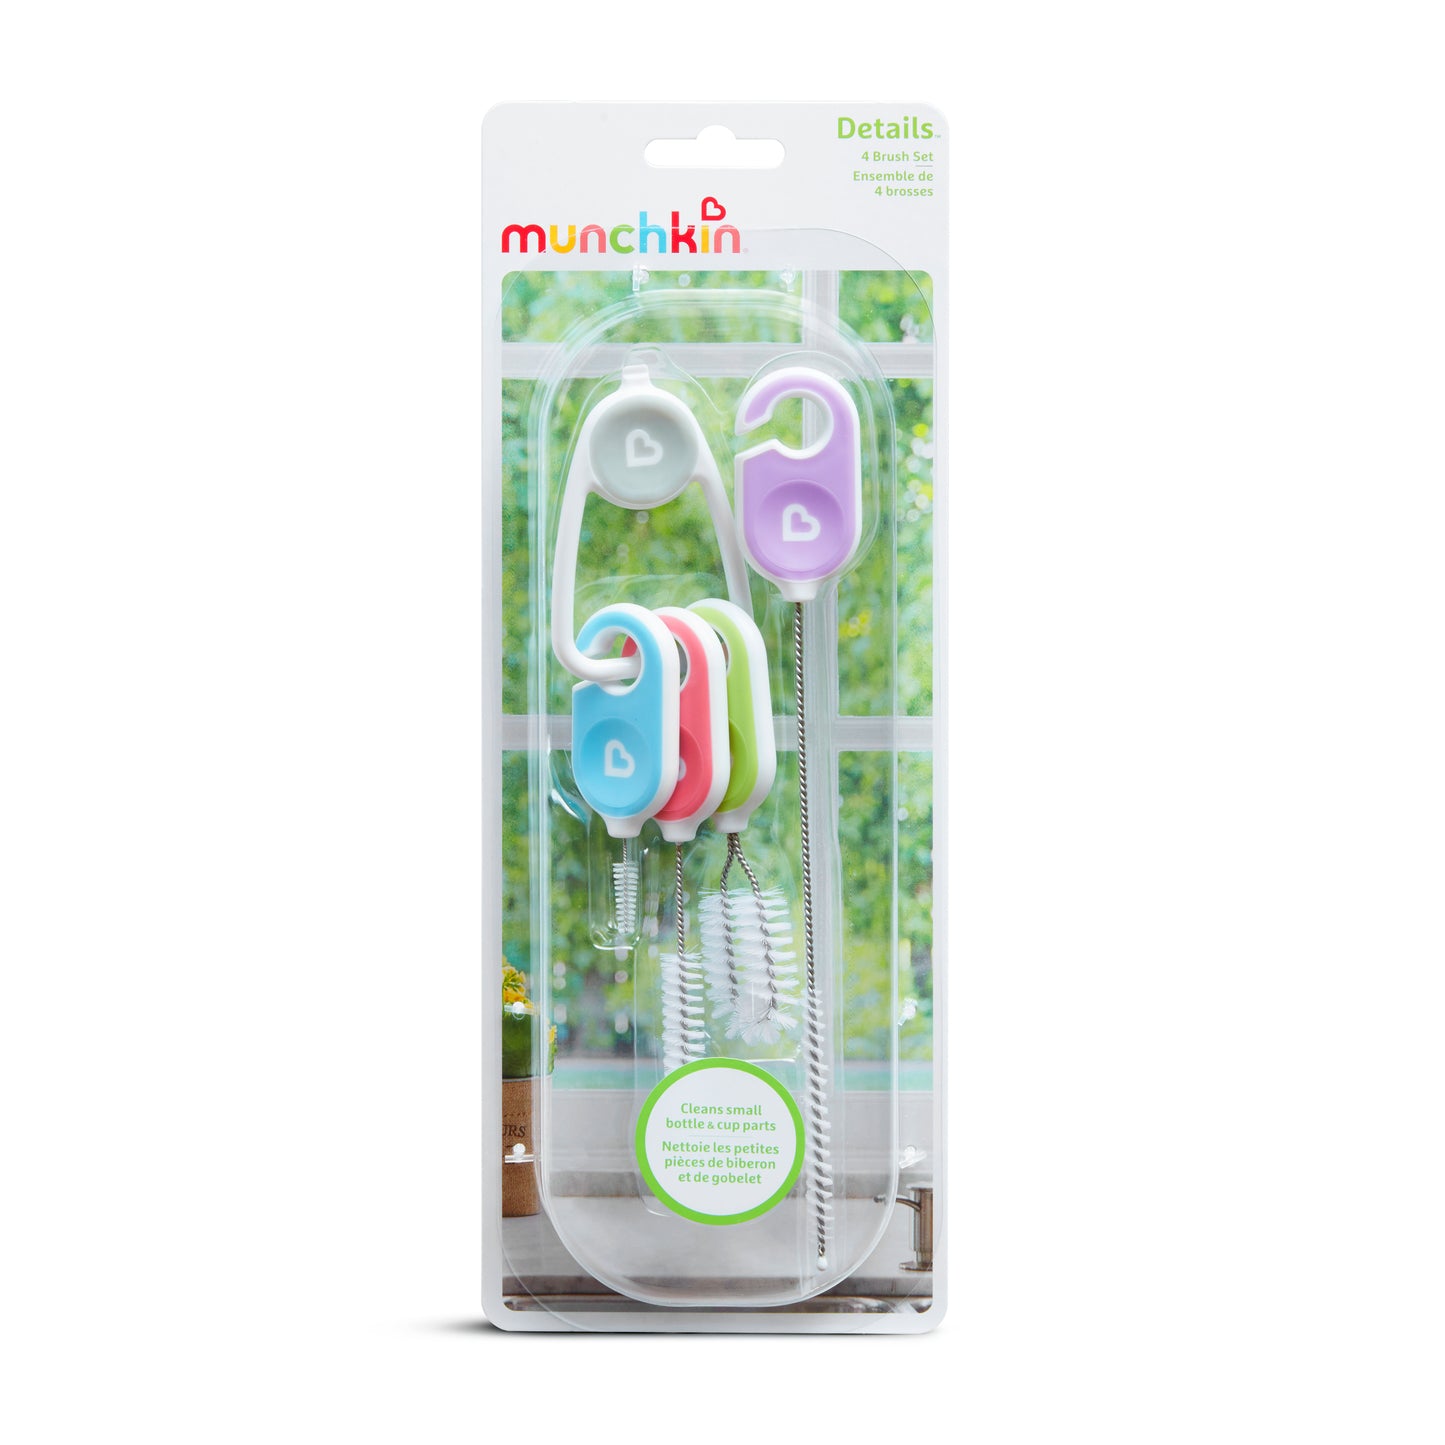 Munchkin Details ™ Bottle & Cup Cleaning Brush Set